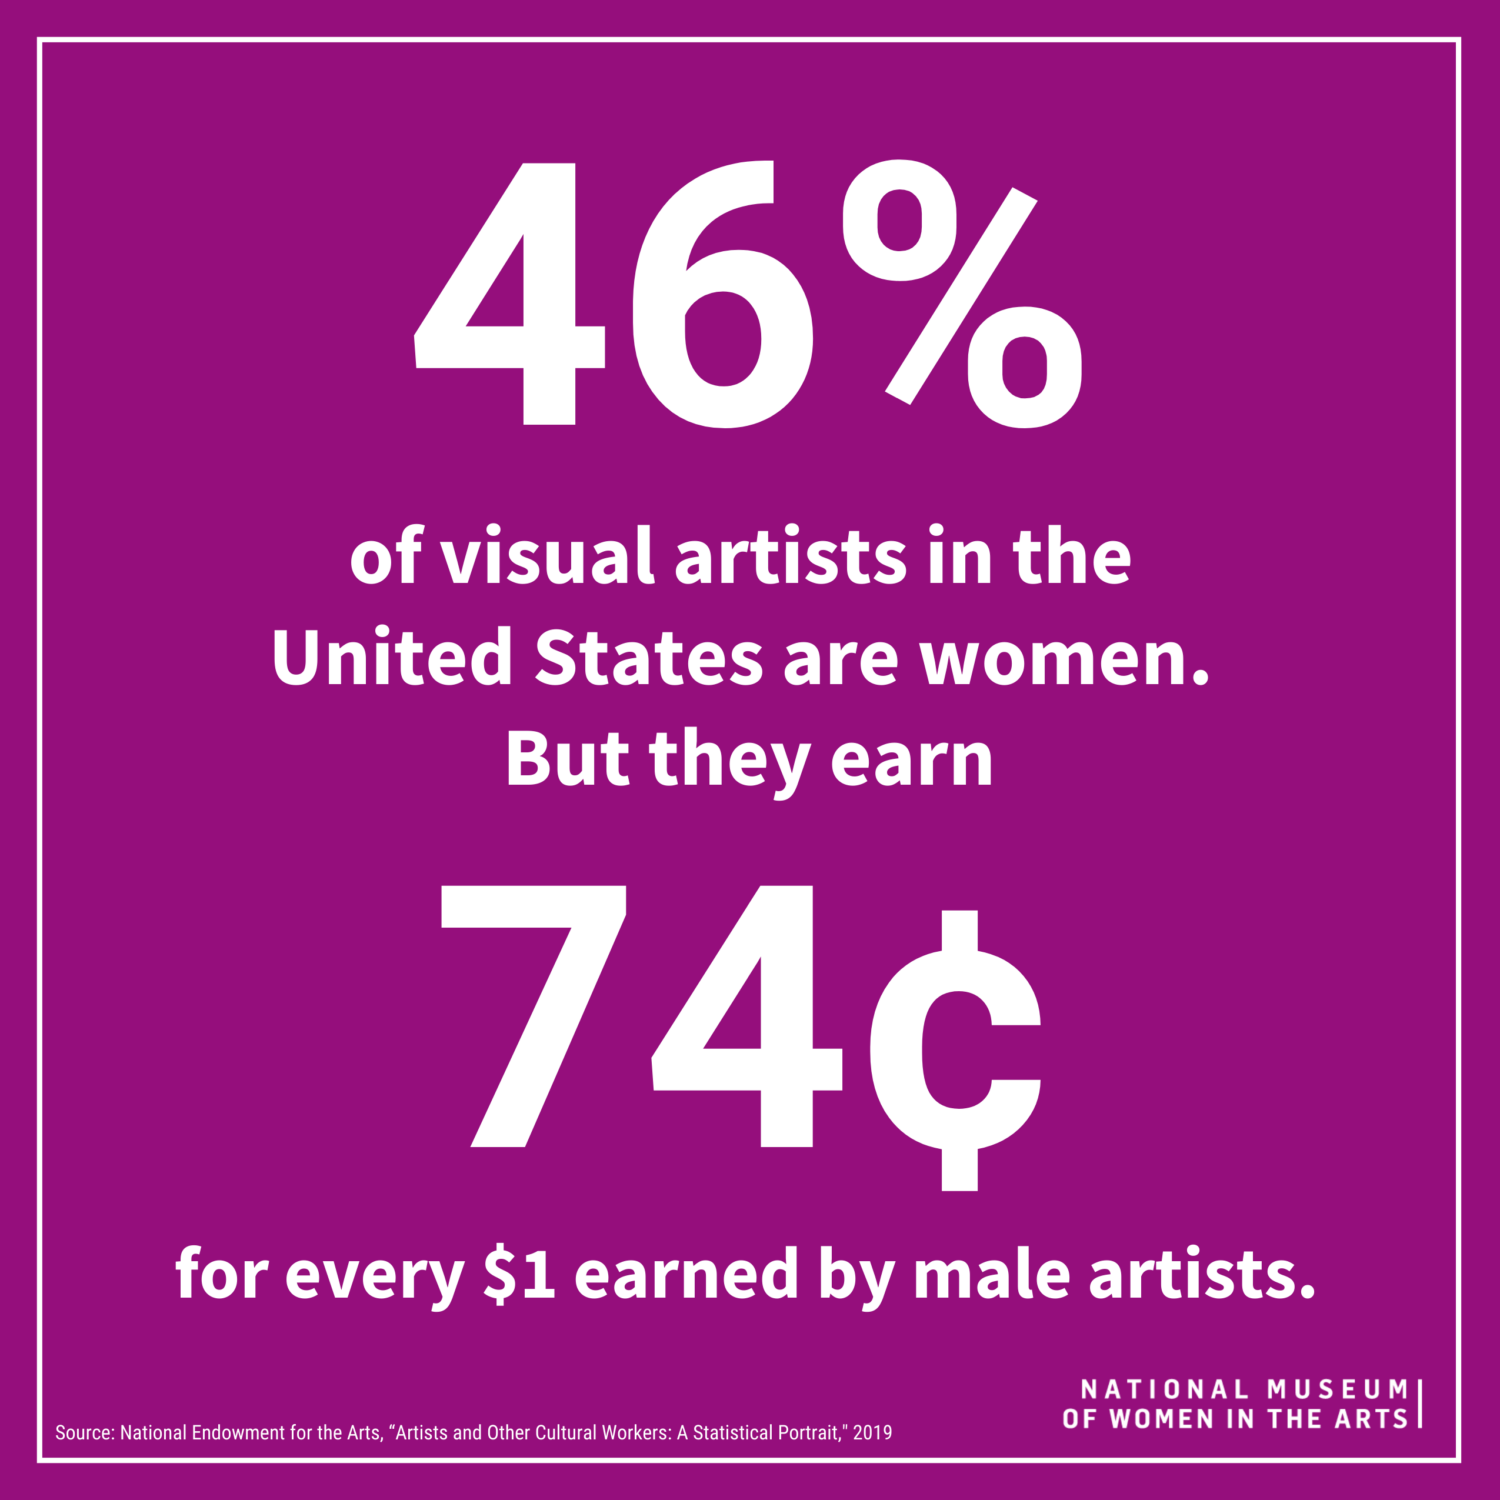 46% of visual artists in US are women, but they earn .74 cents for every $1 earned by male artists.